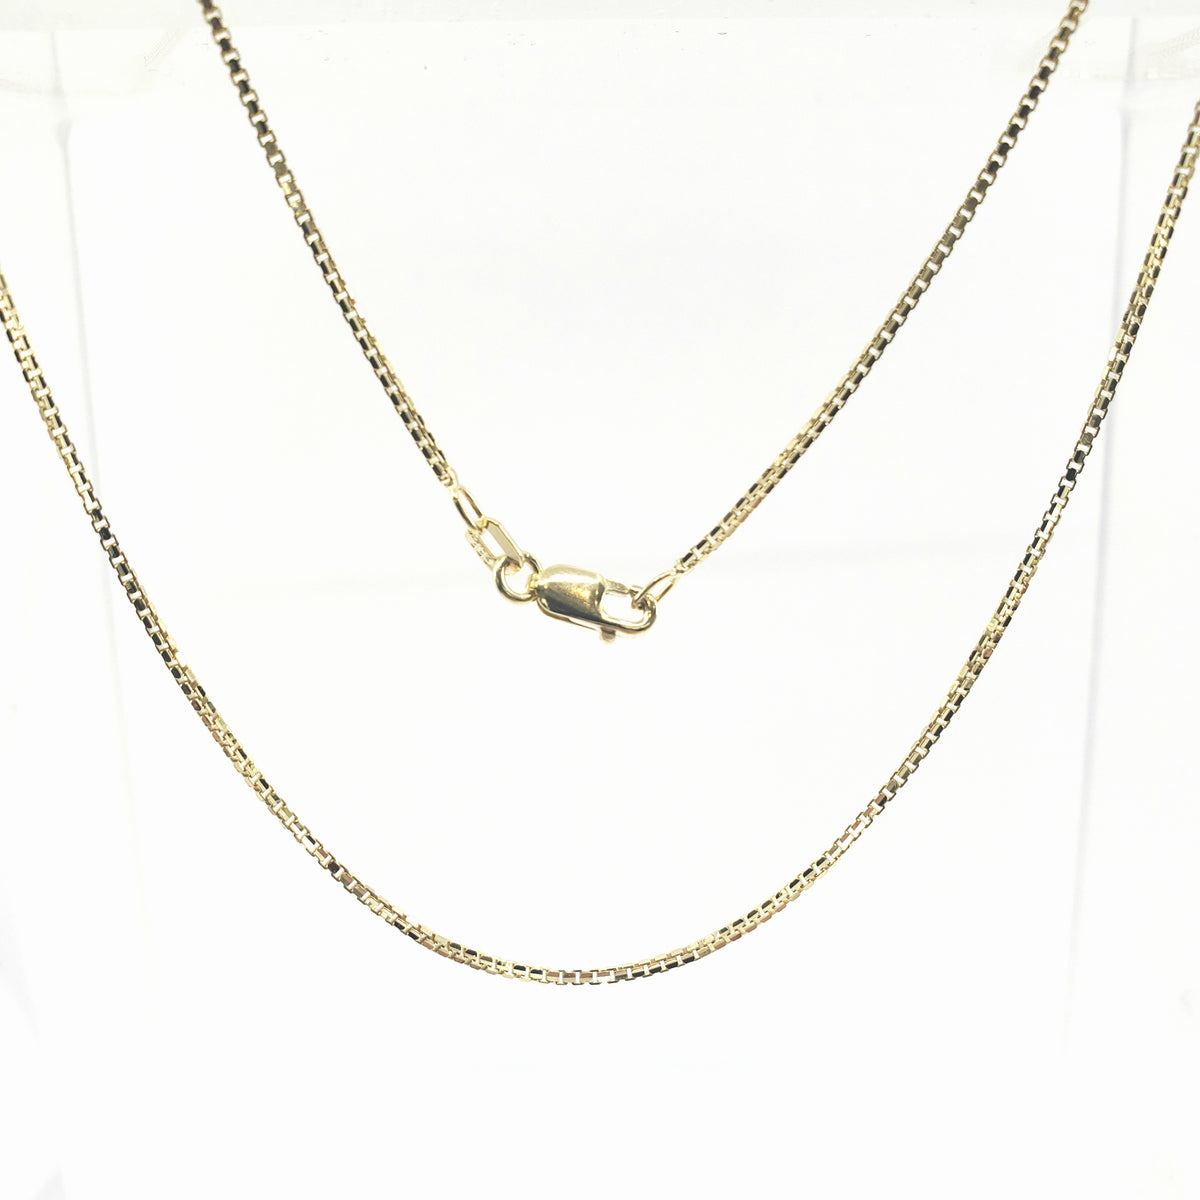 10K Yellow Gold 0.85mm Box Chain with Lobster Clasp - 18 Inches